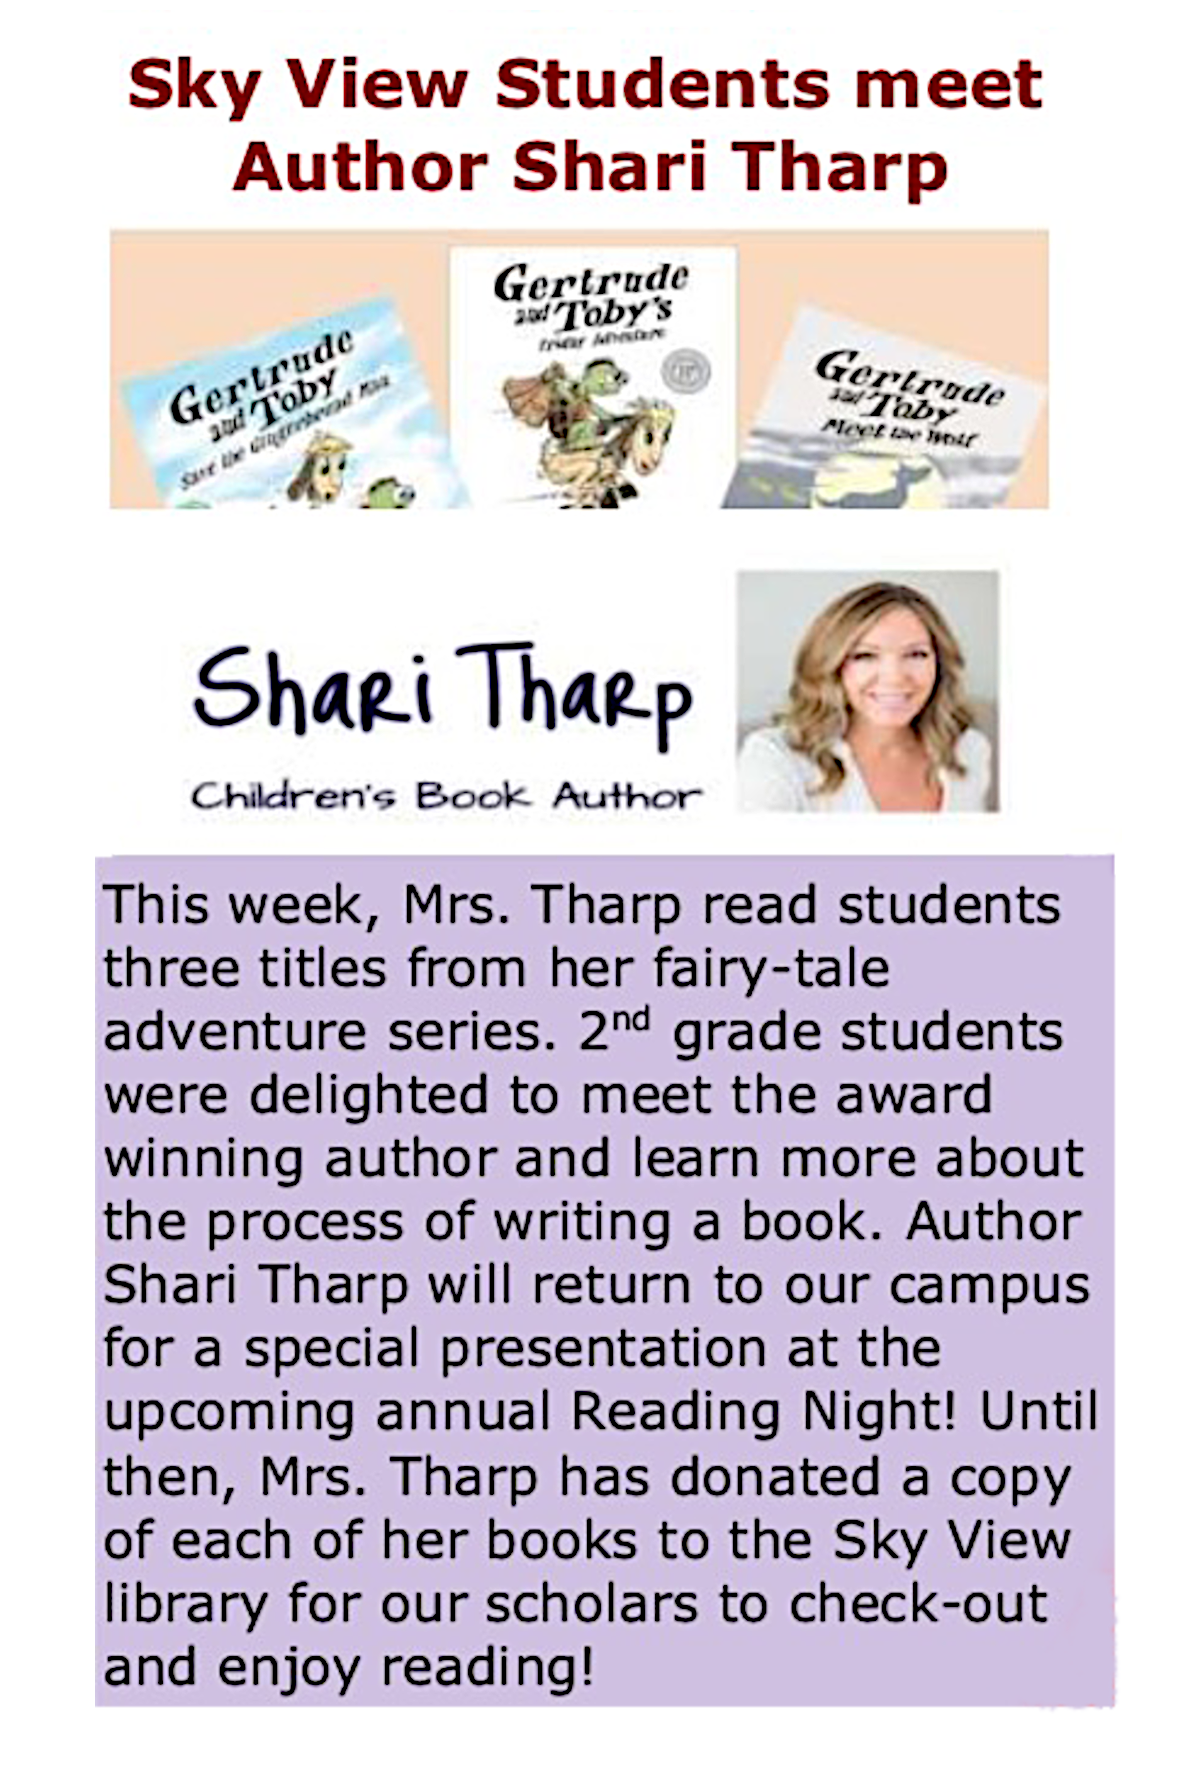 Image of announcement about Shari Tharp's visit to Skyview Elementary School.